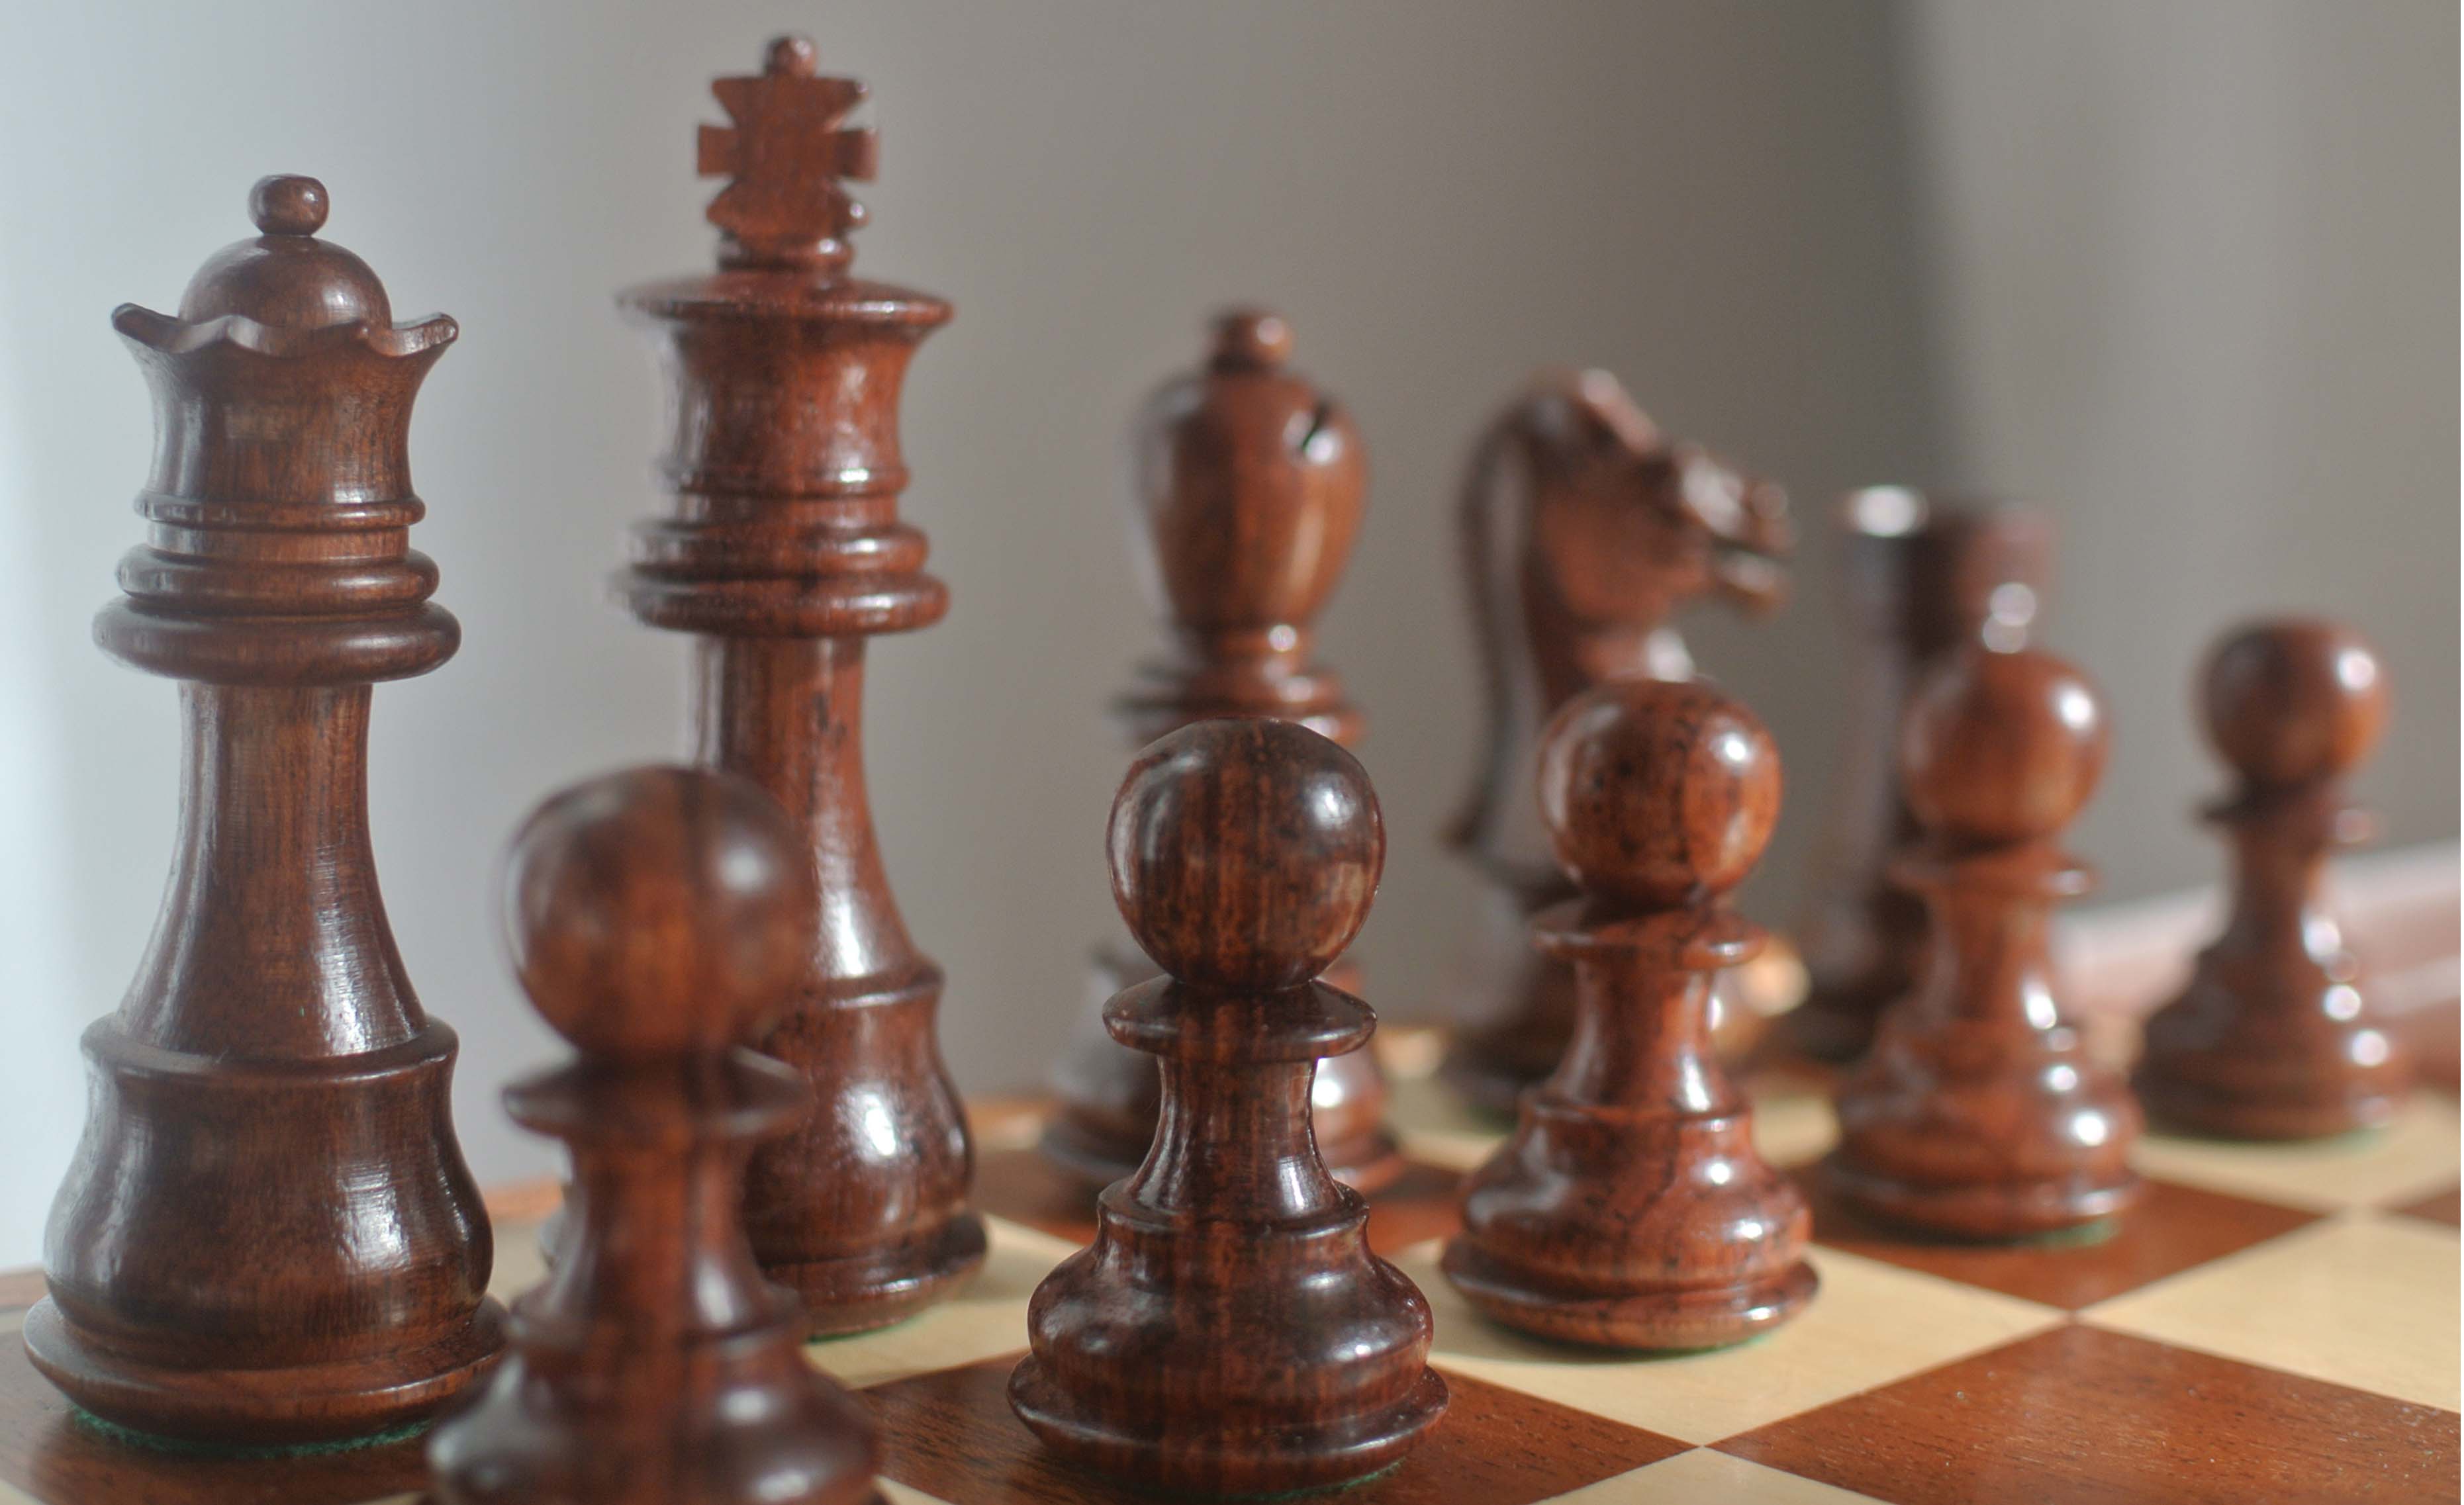 
Quality wooden chess set
